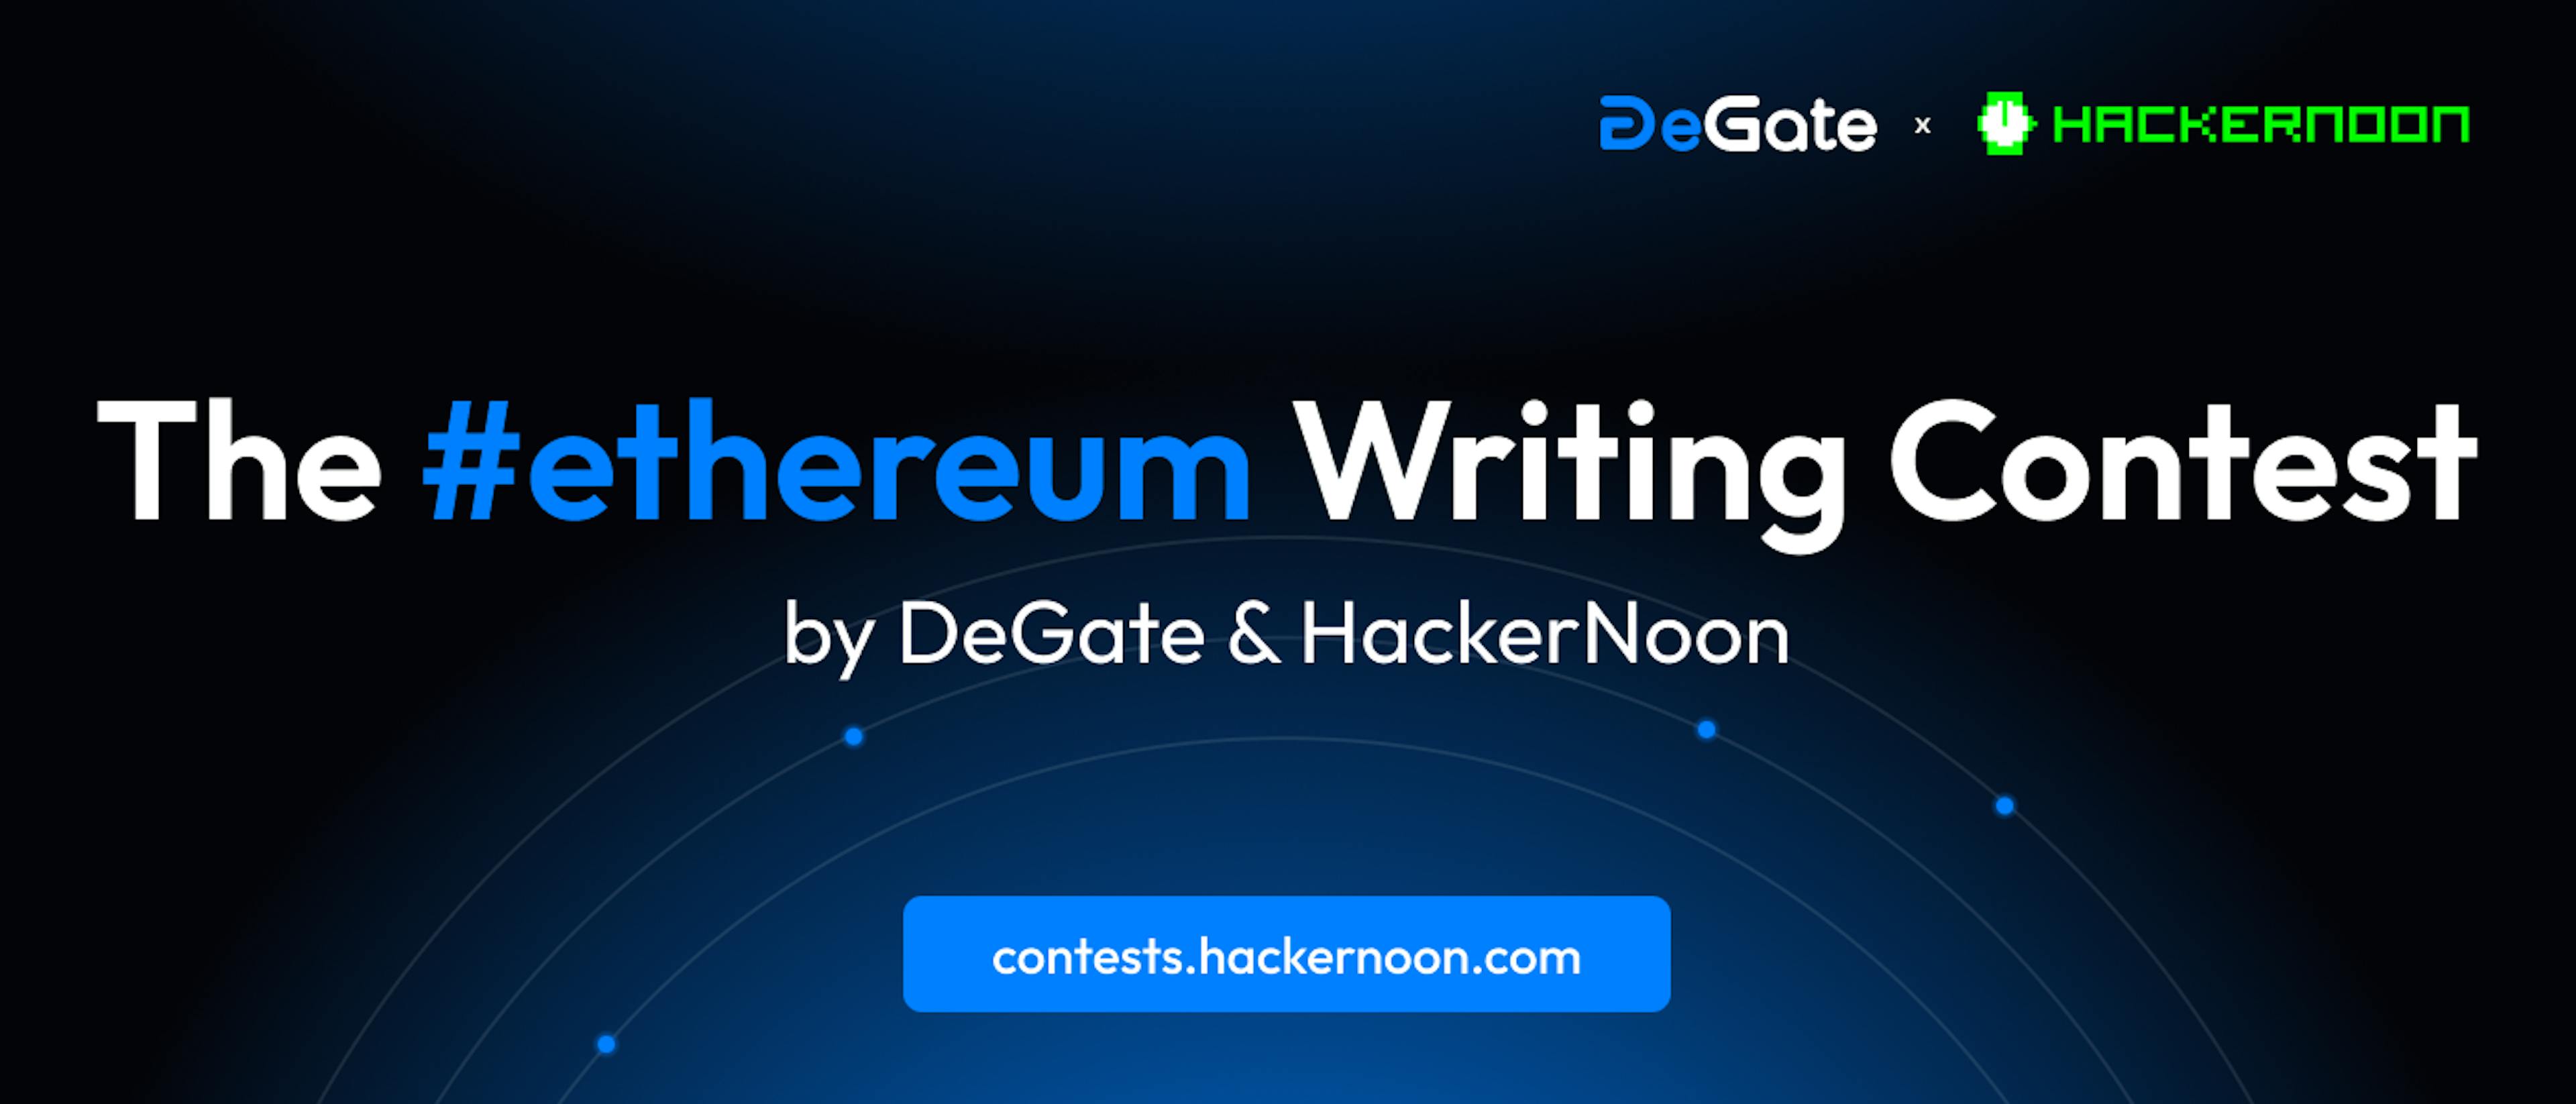 featured image - Enter the #ethereum Writing Contest and Compete for $1,000 in Prizes